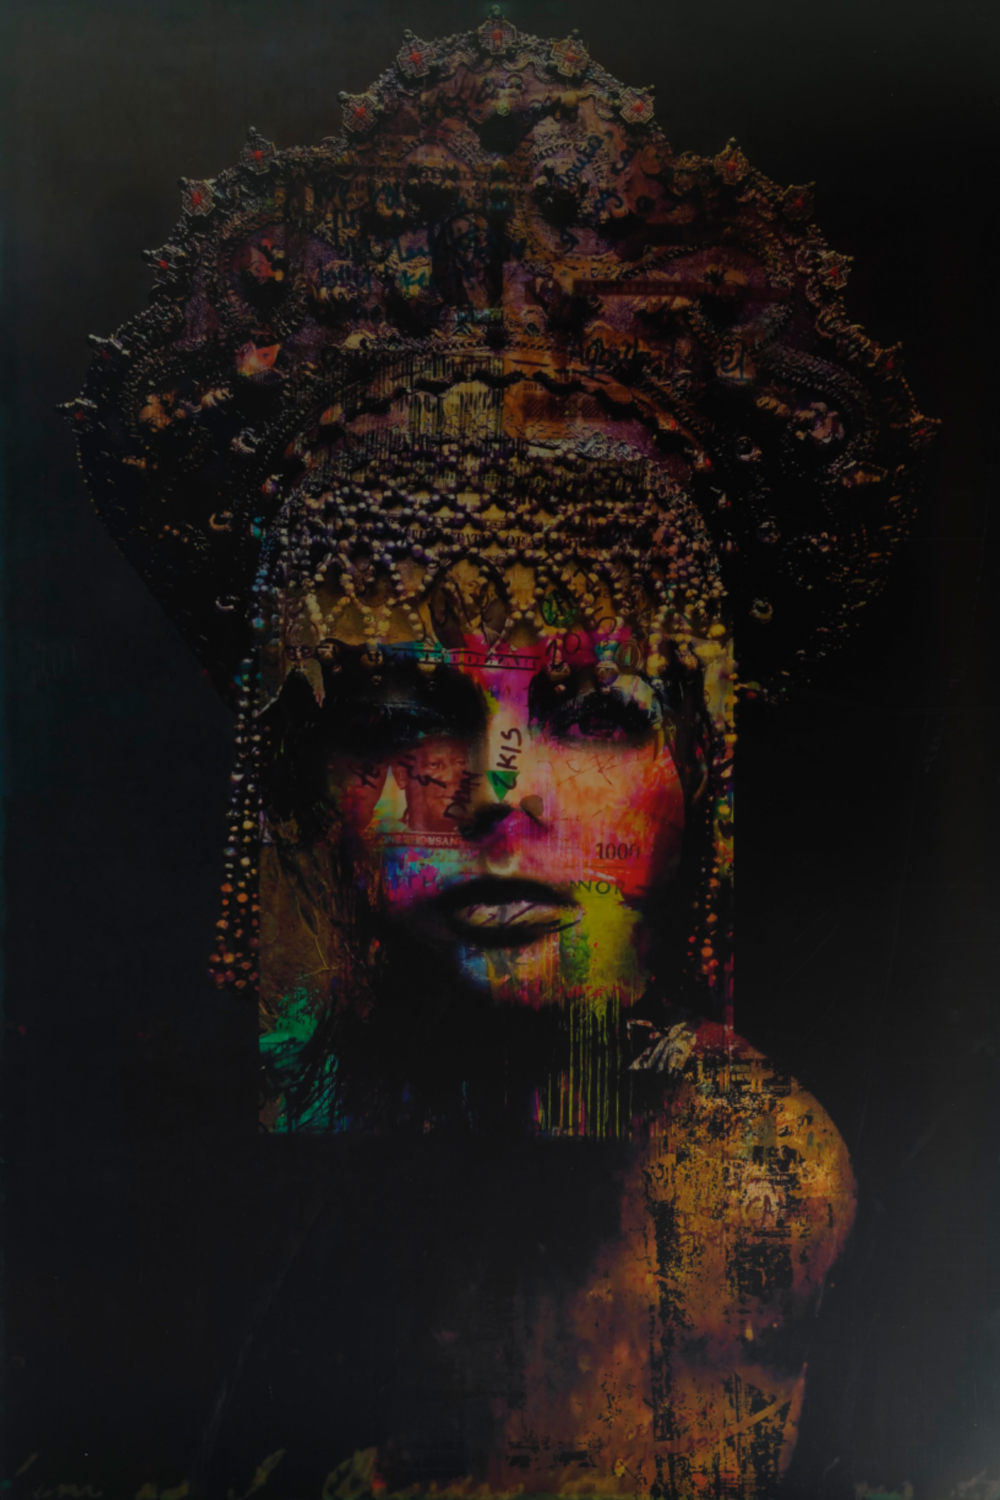 Woman with Indian Headdress Artwork | Andrew Martin Look For You